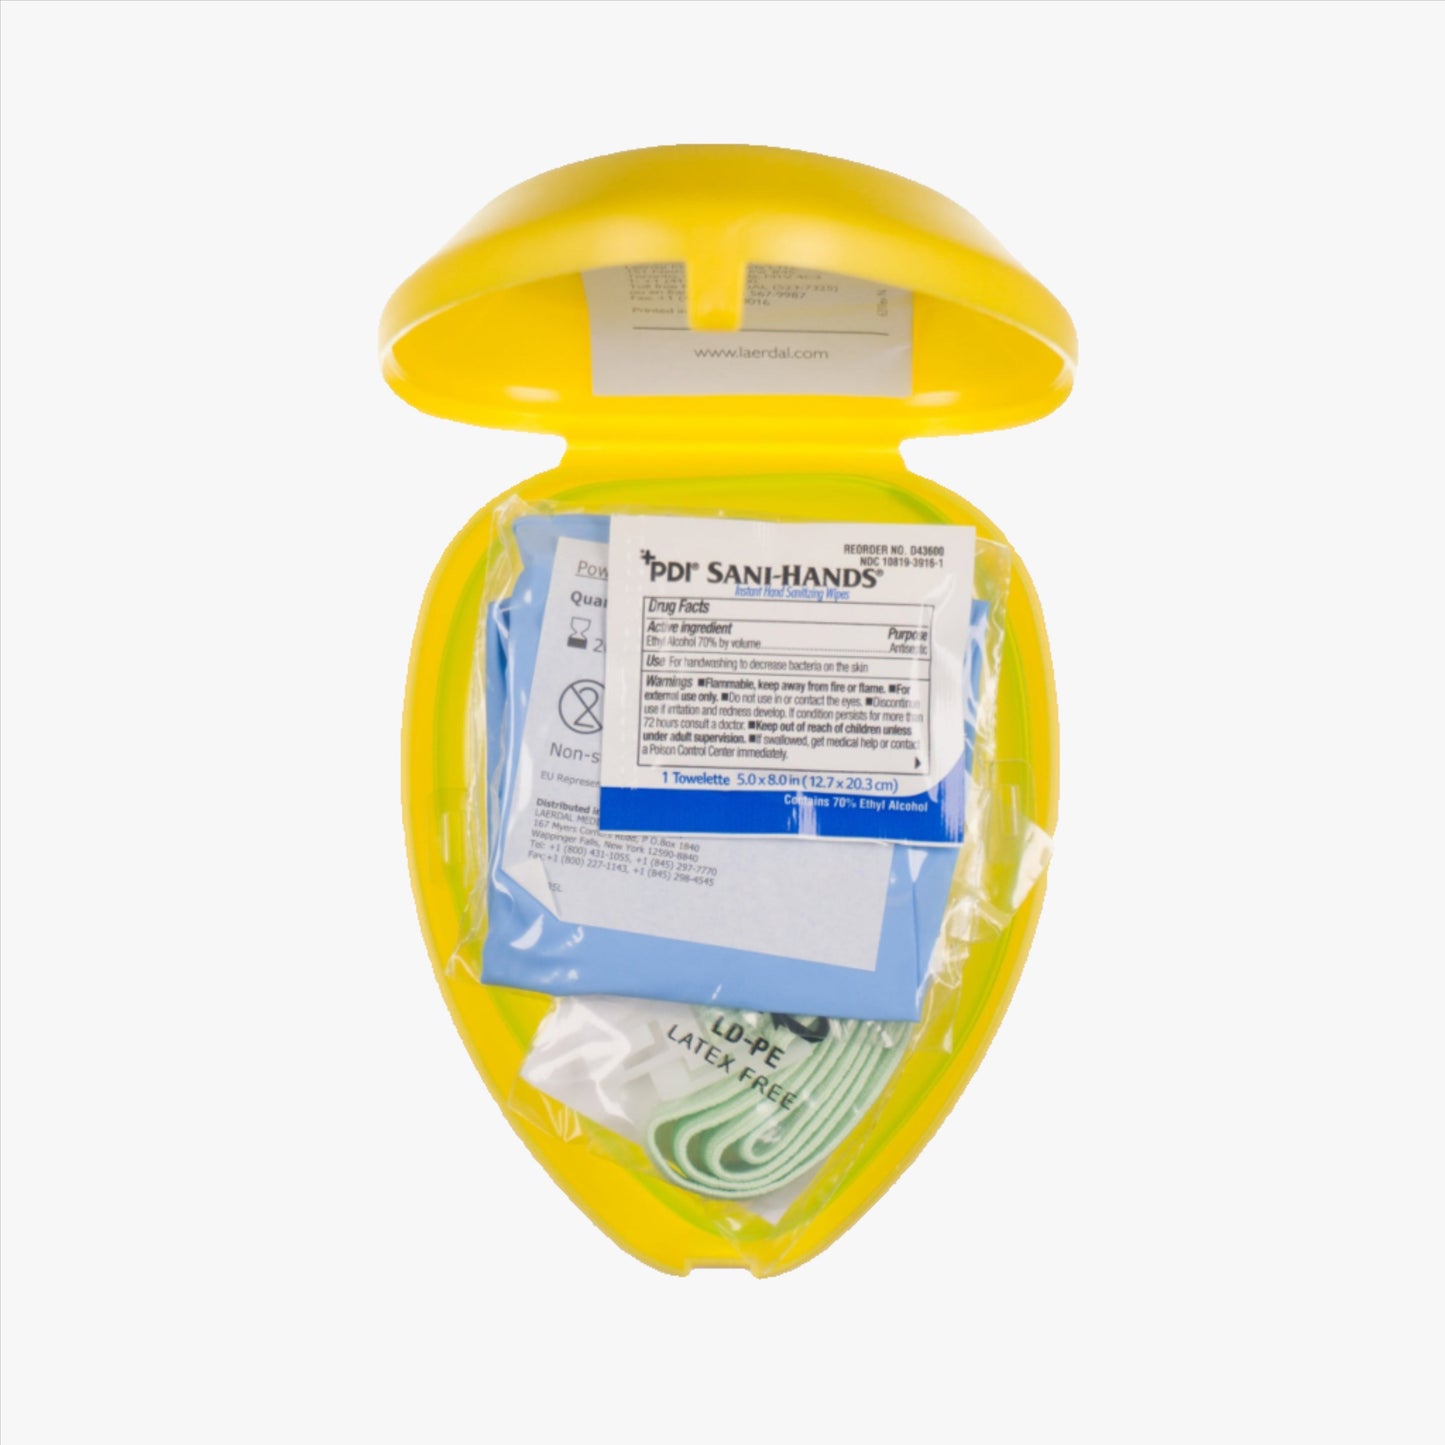 Laerdal Pocket mask with valve and oxygen nipple